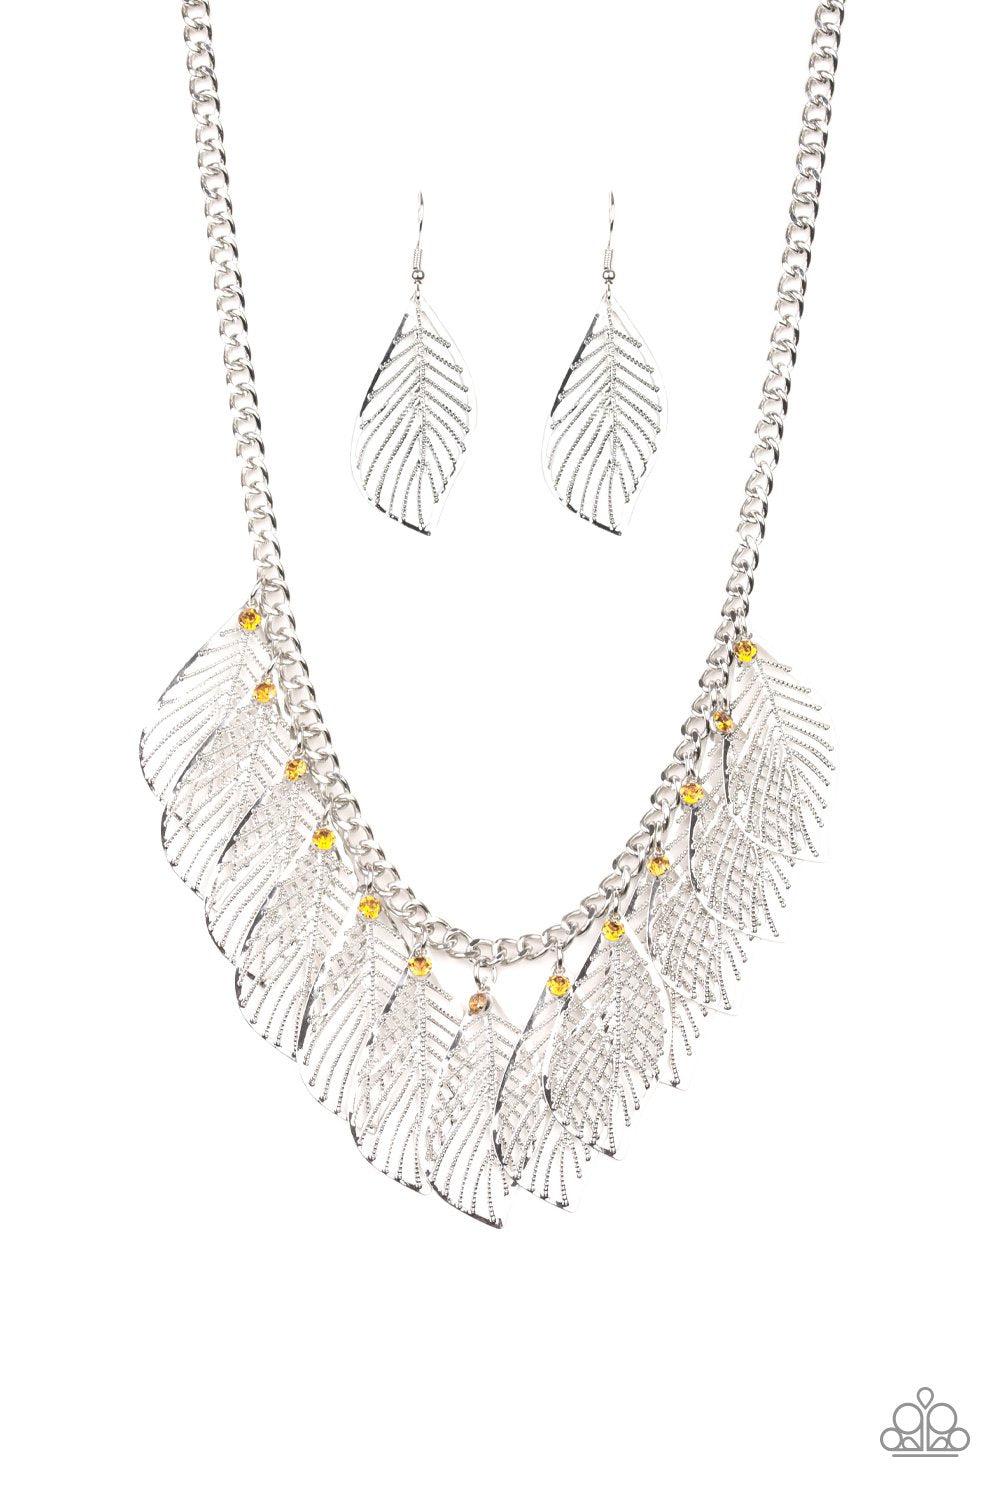 Feathery Foliage Silver and Yellow Necklace and matching Earrings - Paparazzi Accessories-CarasShop.com - $5 Jewelry by Cara Jewels